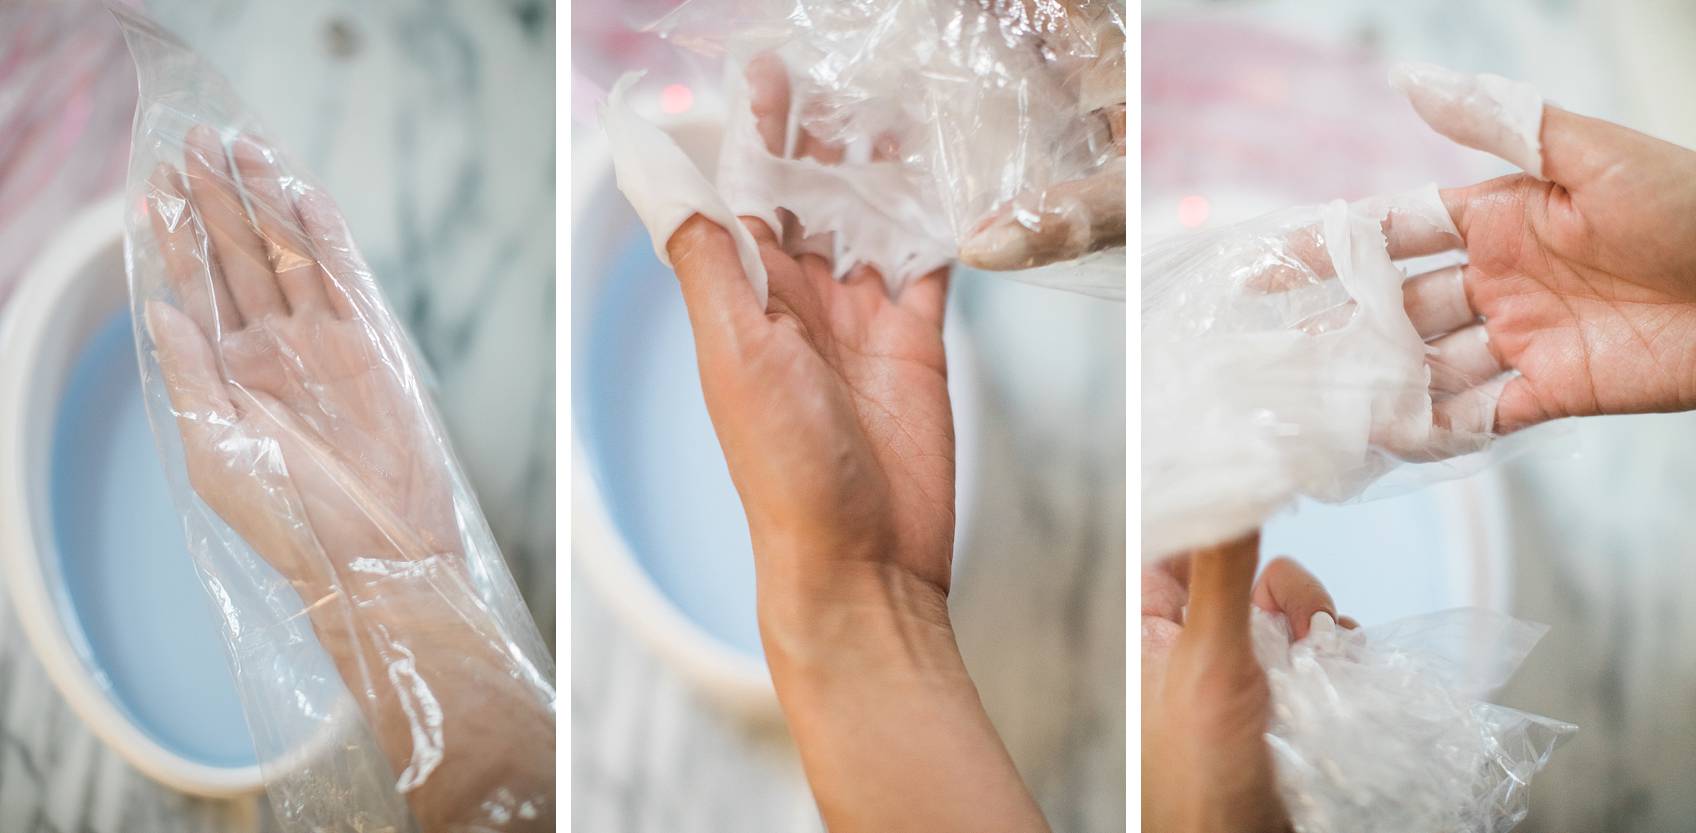 removing paraffin wax off hands after using conair paraffin wax bath - a how to and before after photos